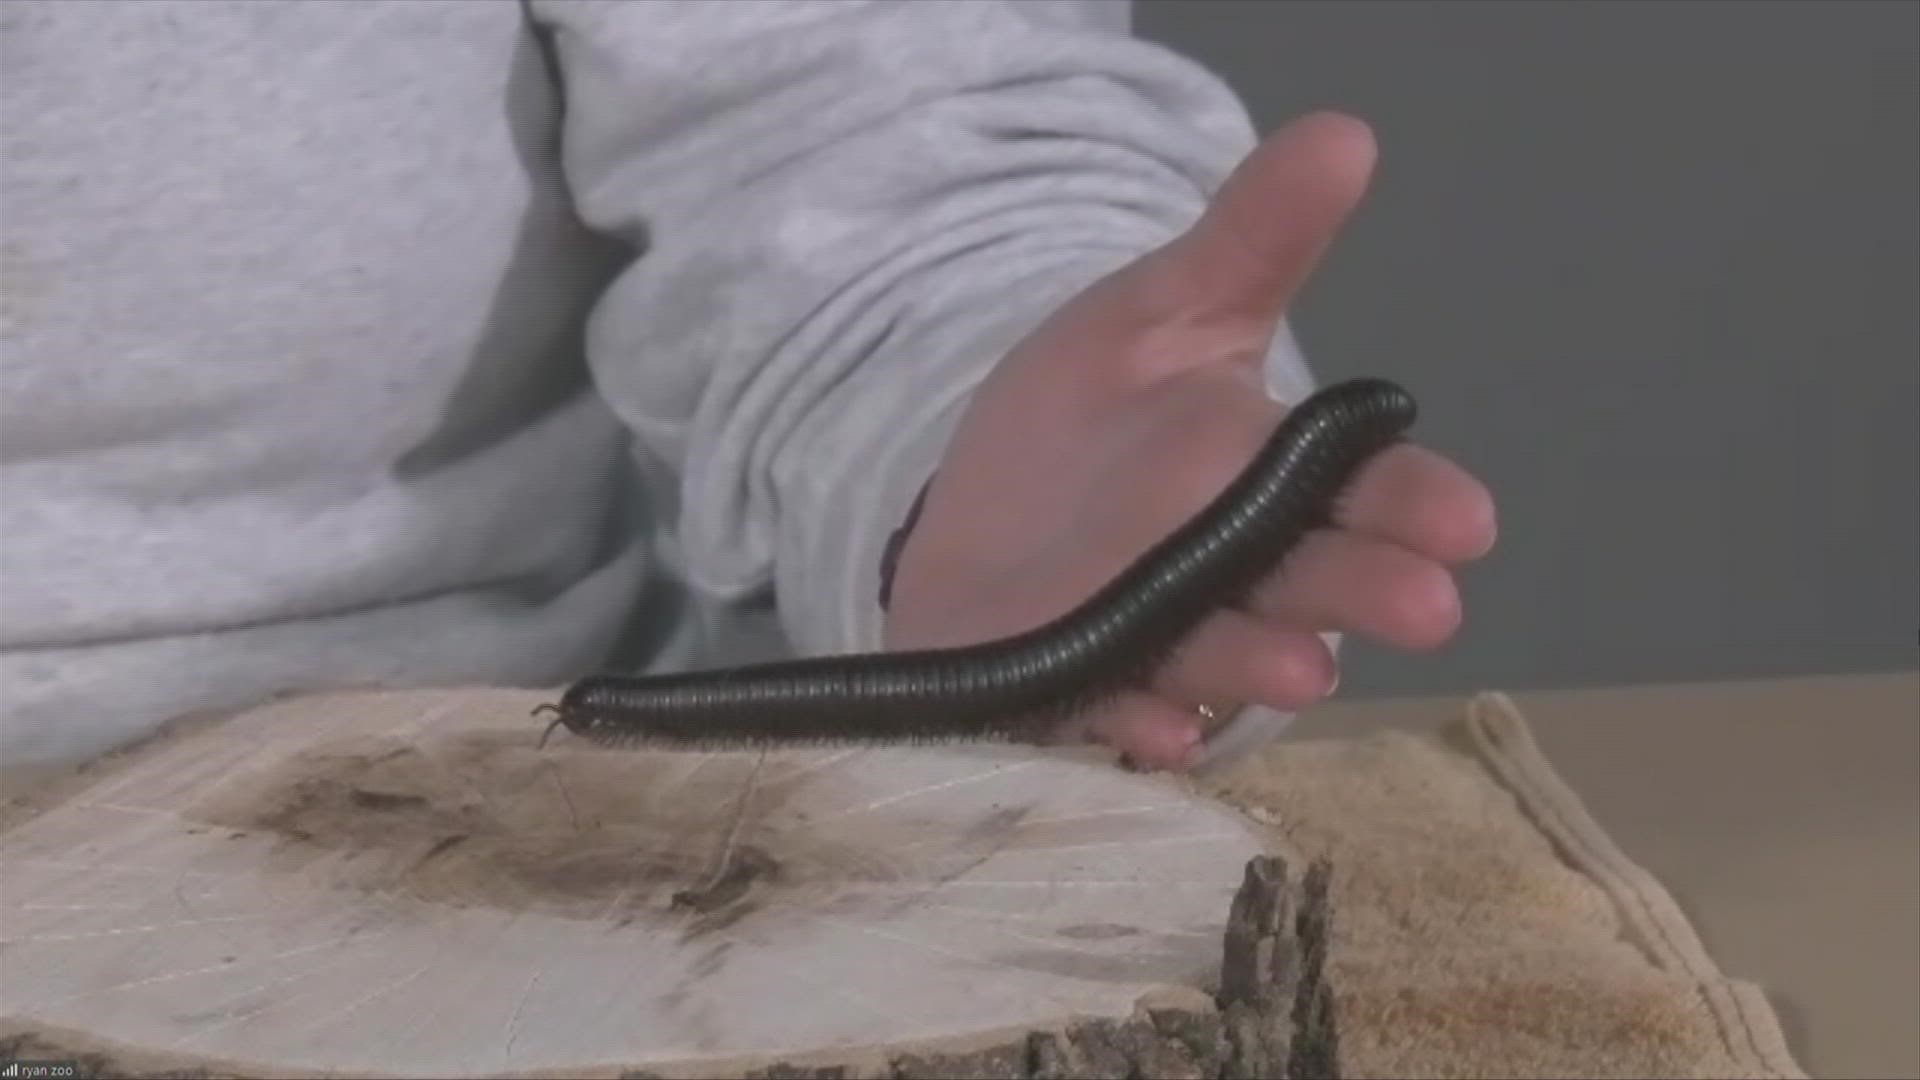 Julia Bingham, Blank Park Zoo, shows us a Giant African Millipede and a (huge) Madagascar Hissing Cockroach as we get ready for the final weekend of Night Eyes!